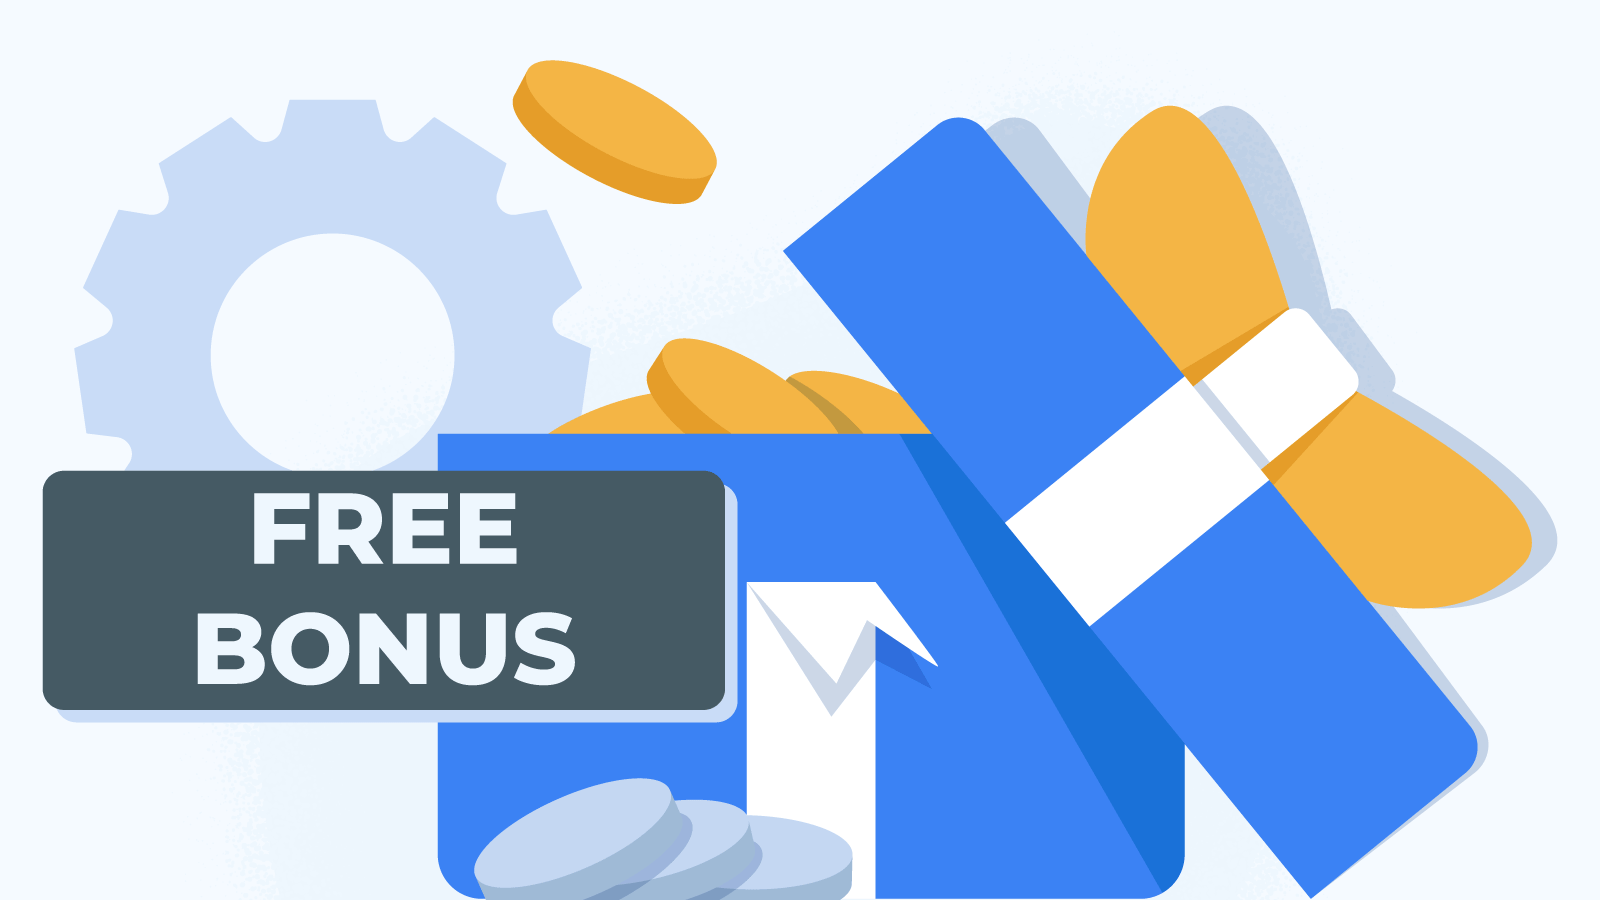 What is the Purpose of Free Bonuses